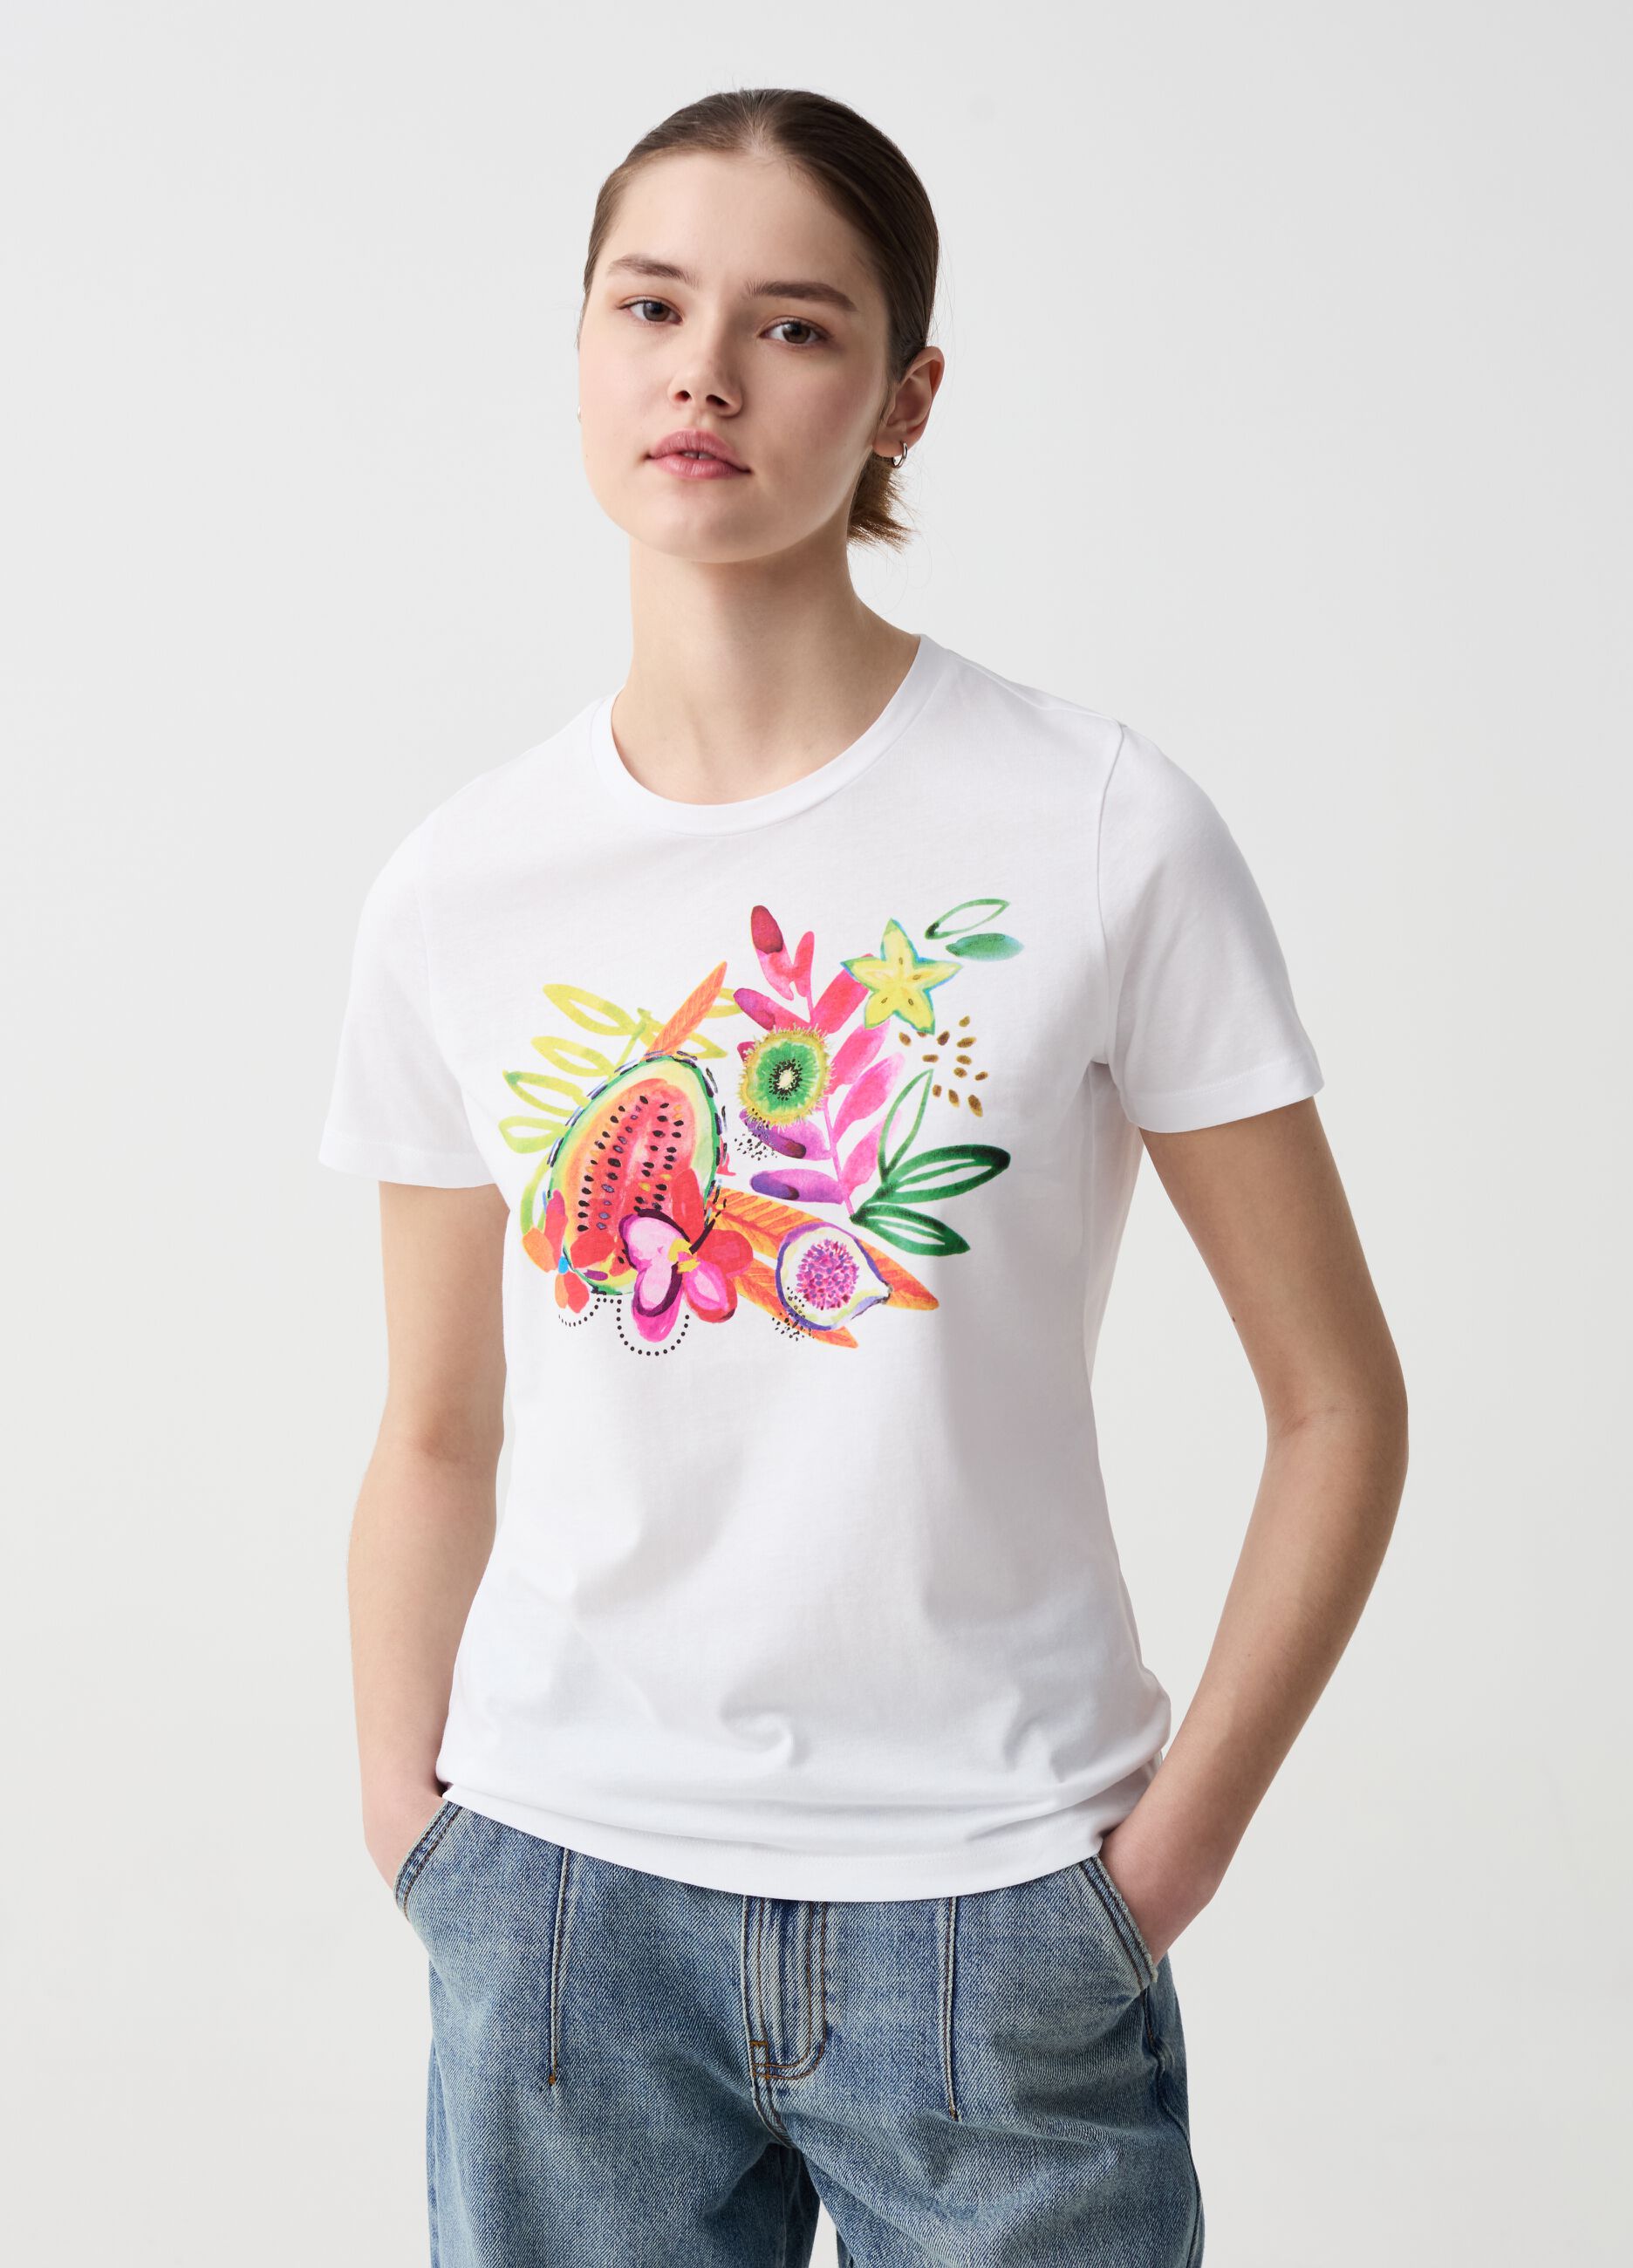 T-shirt with graphic illustration by Magda Azab